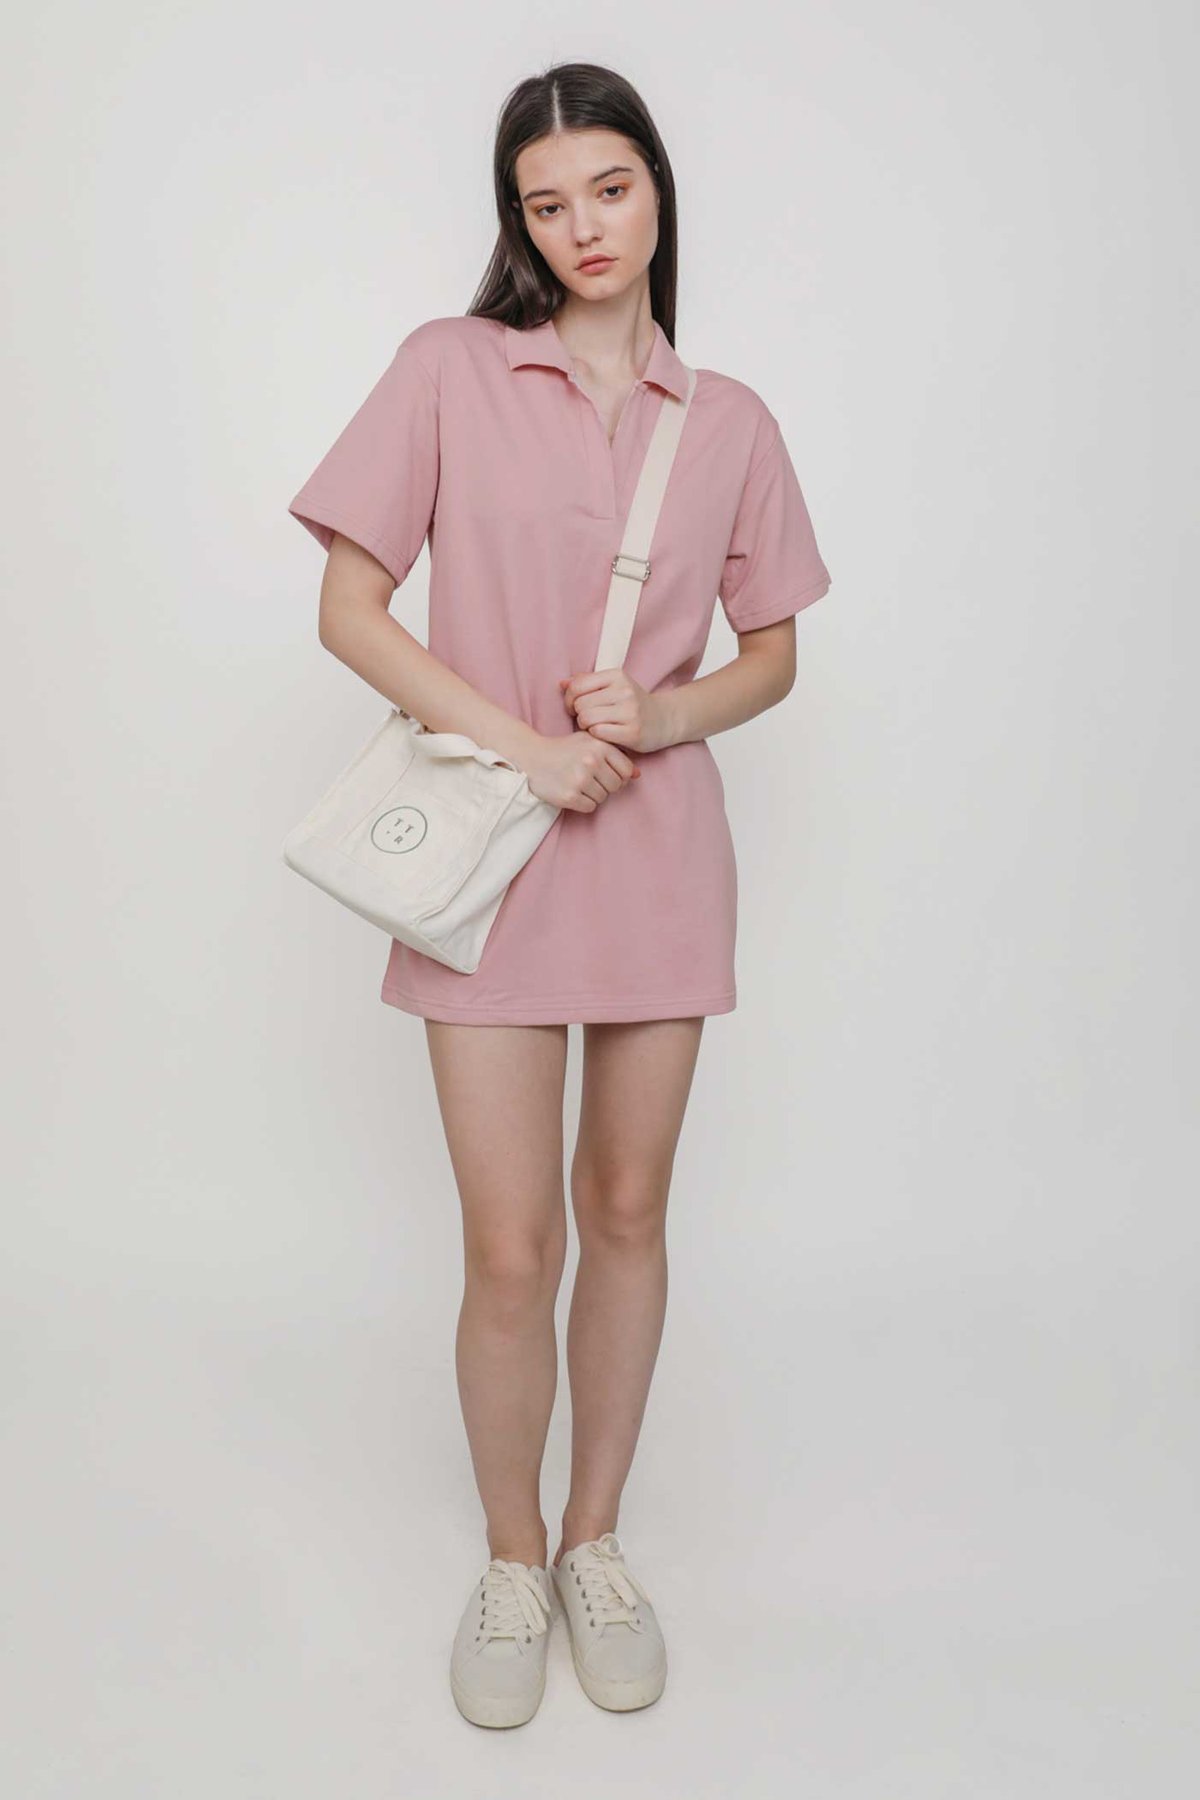 Anderson Polo Dress (Pink) 